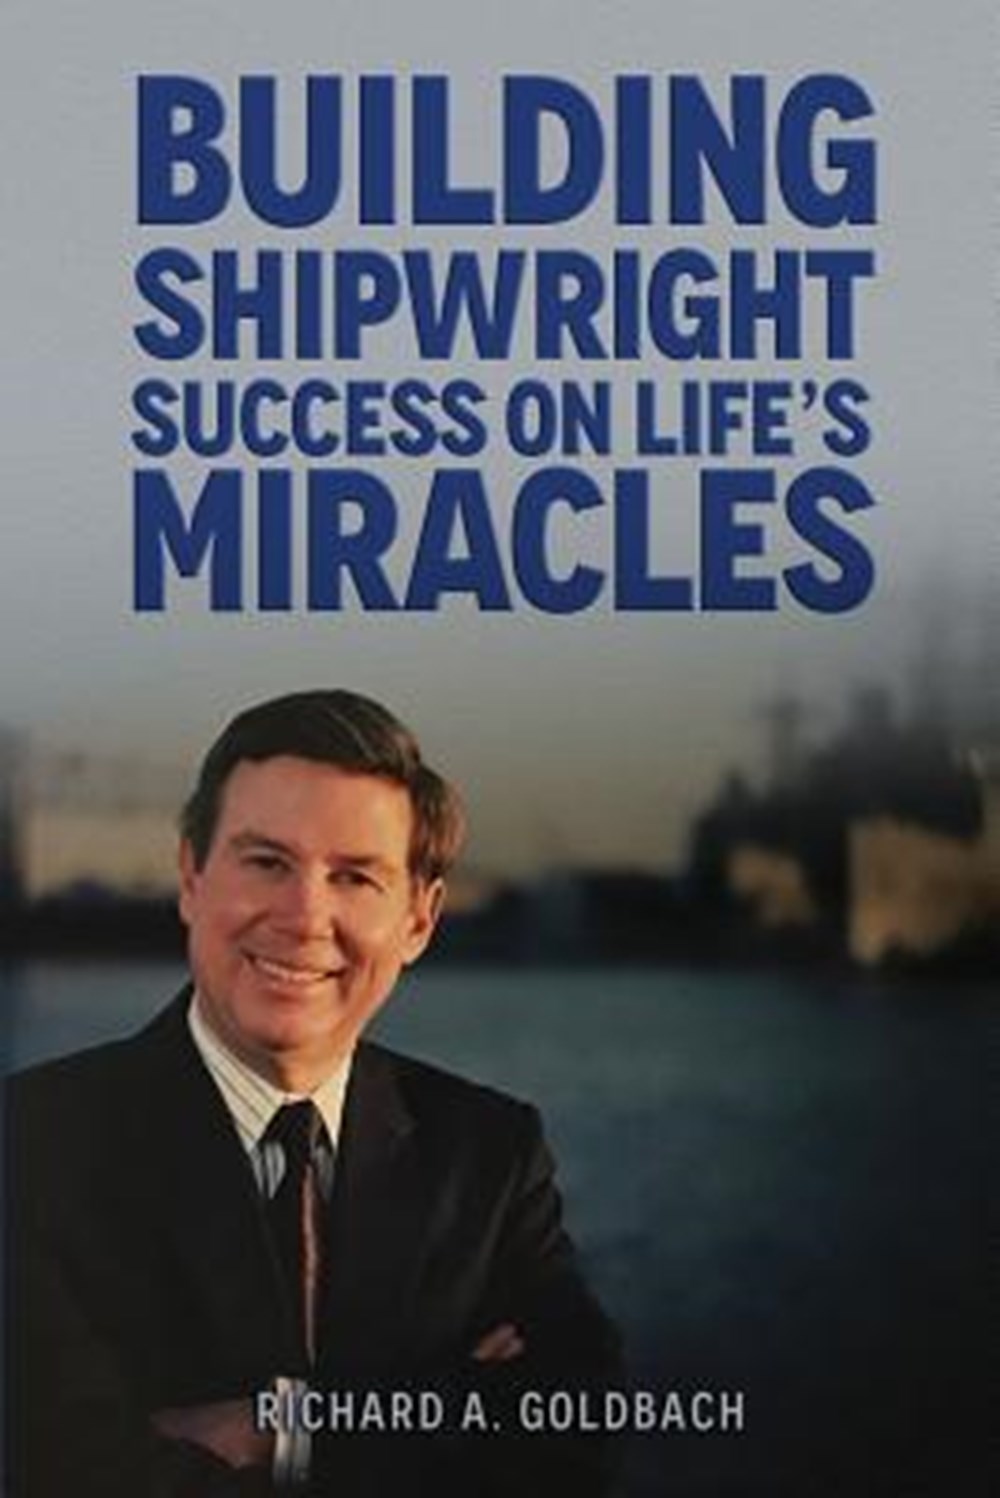 Building Shipwright Success on Life's Miracles